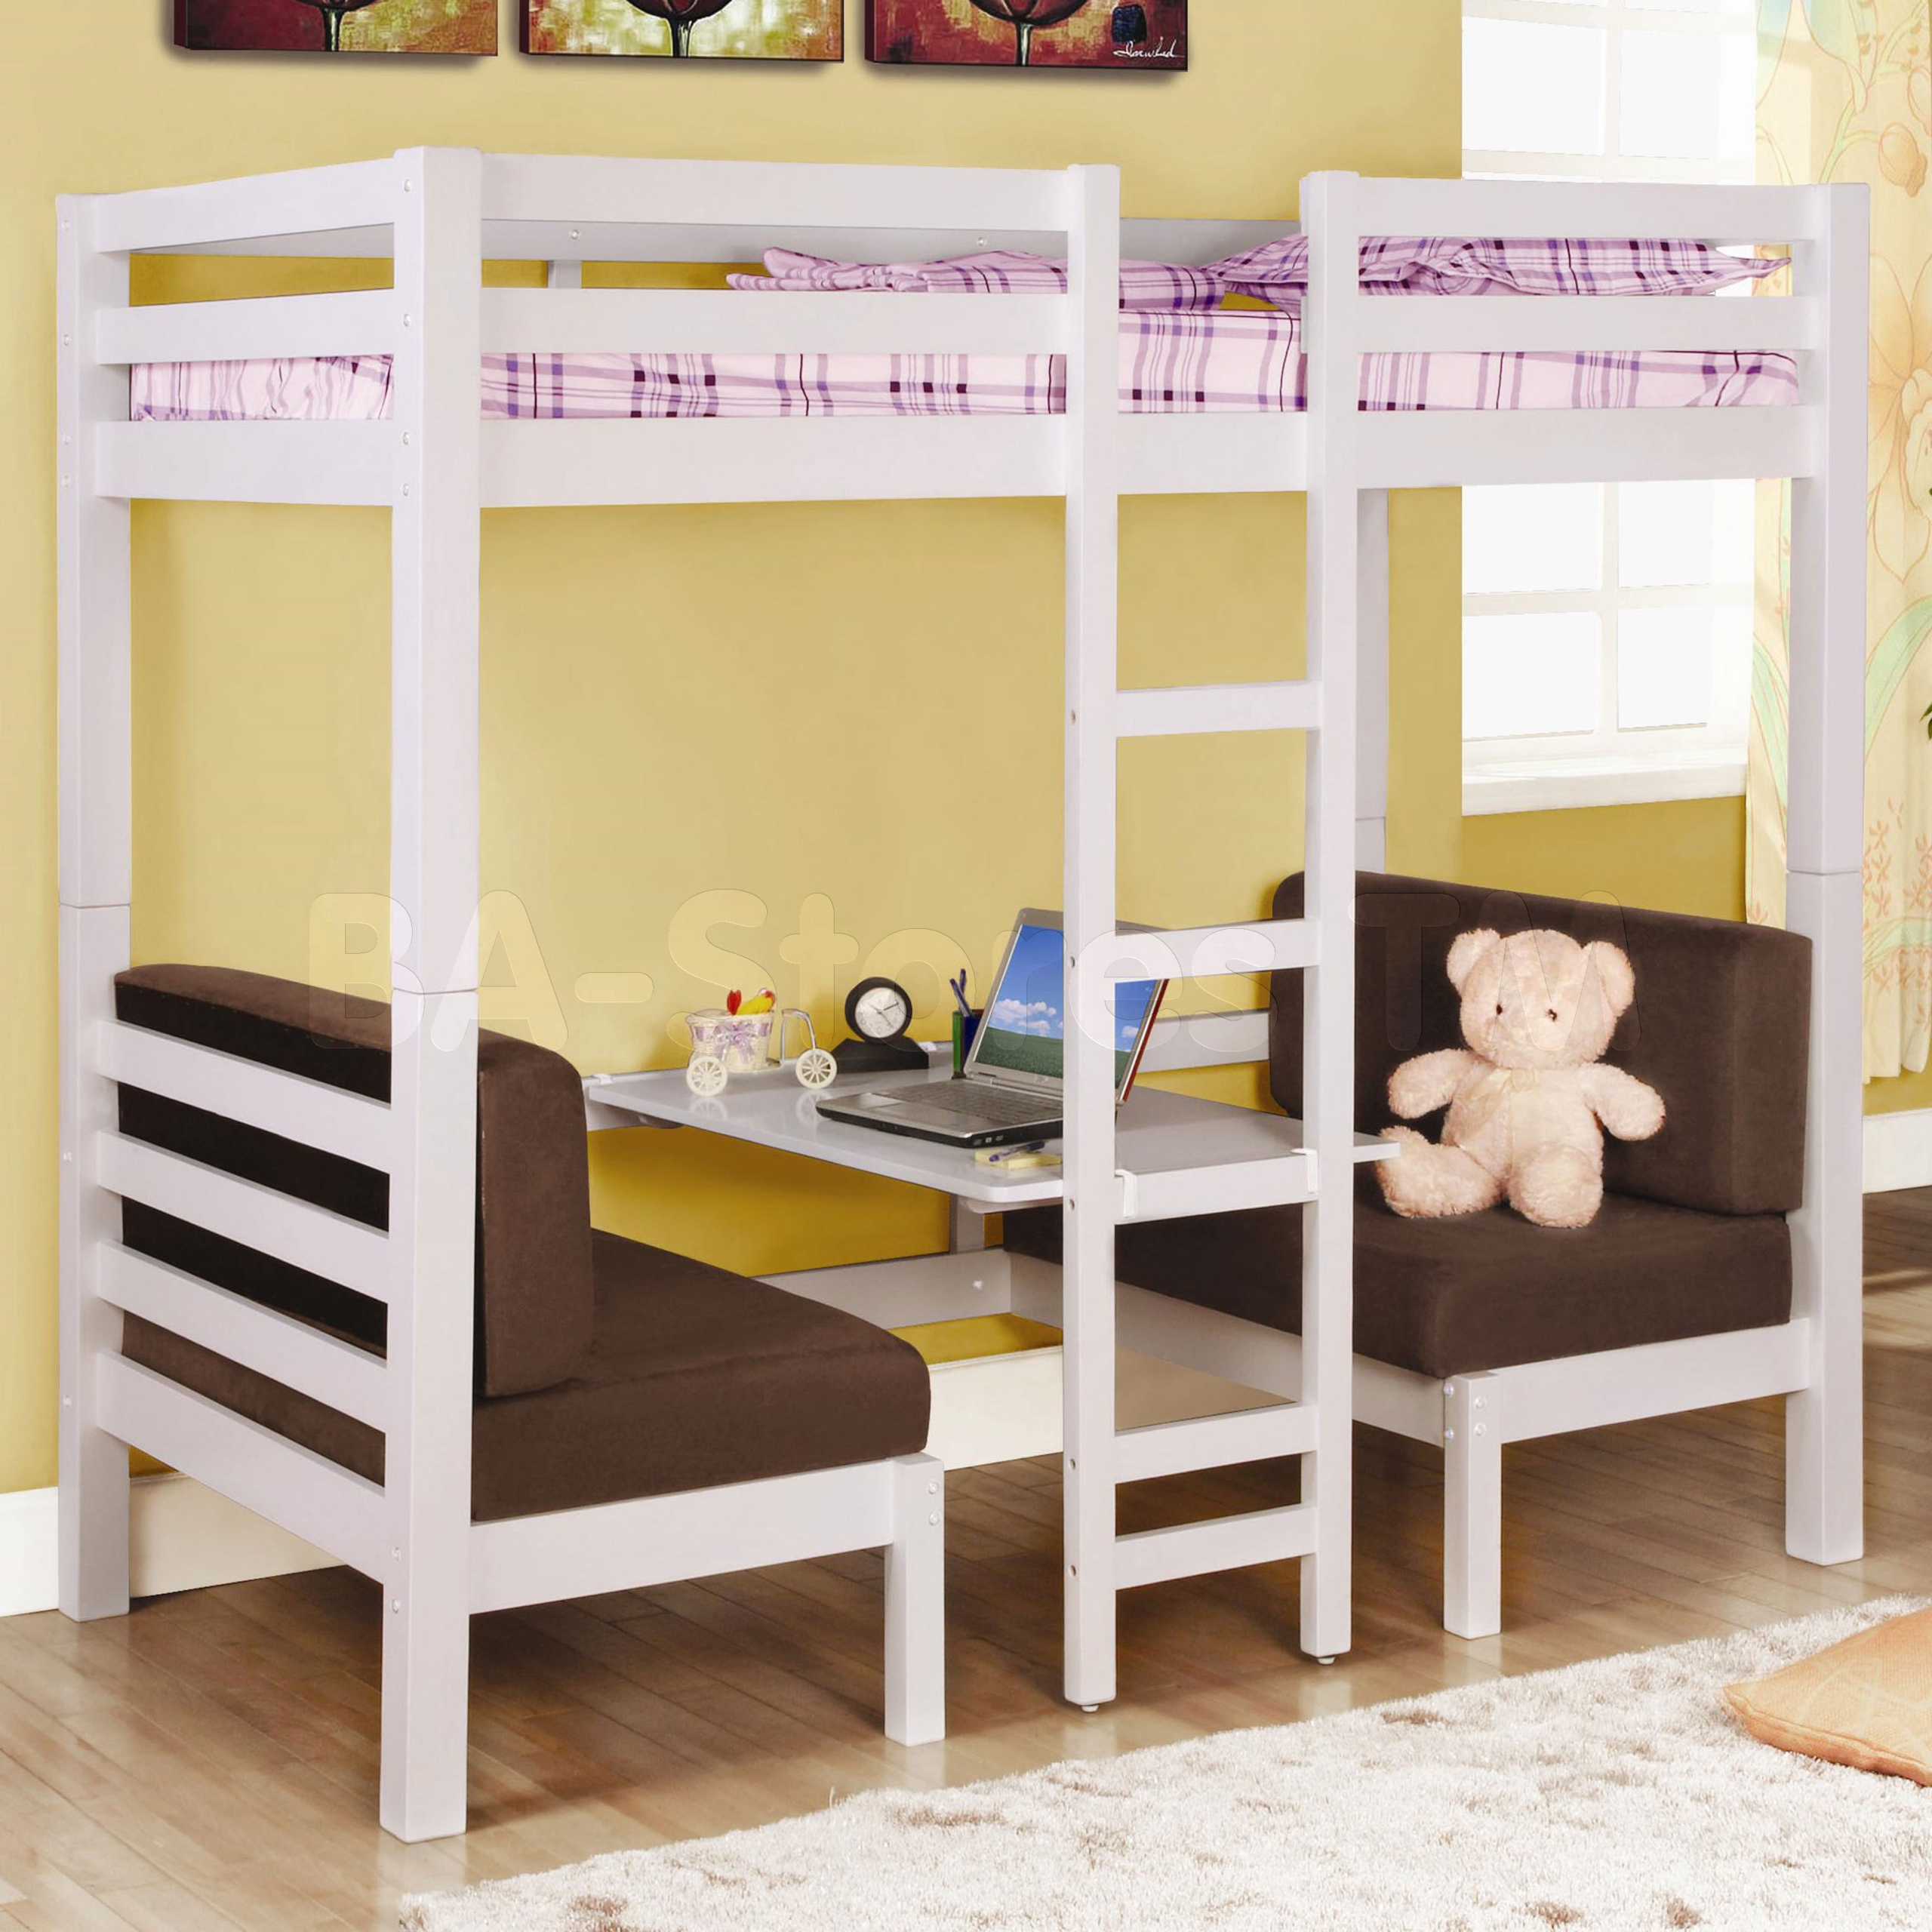 White Twin Loft Bunk Conversion Bed With Play Area Bedroom Furniture Set Sale